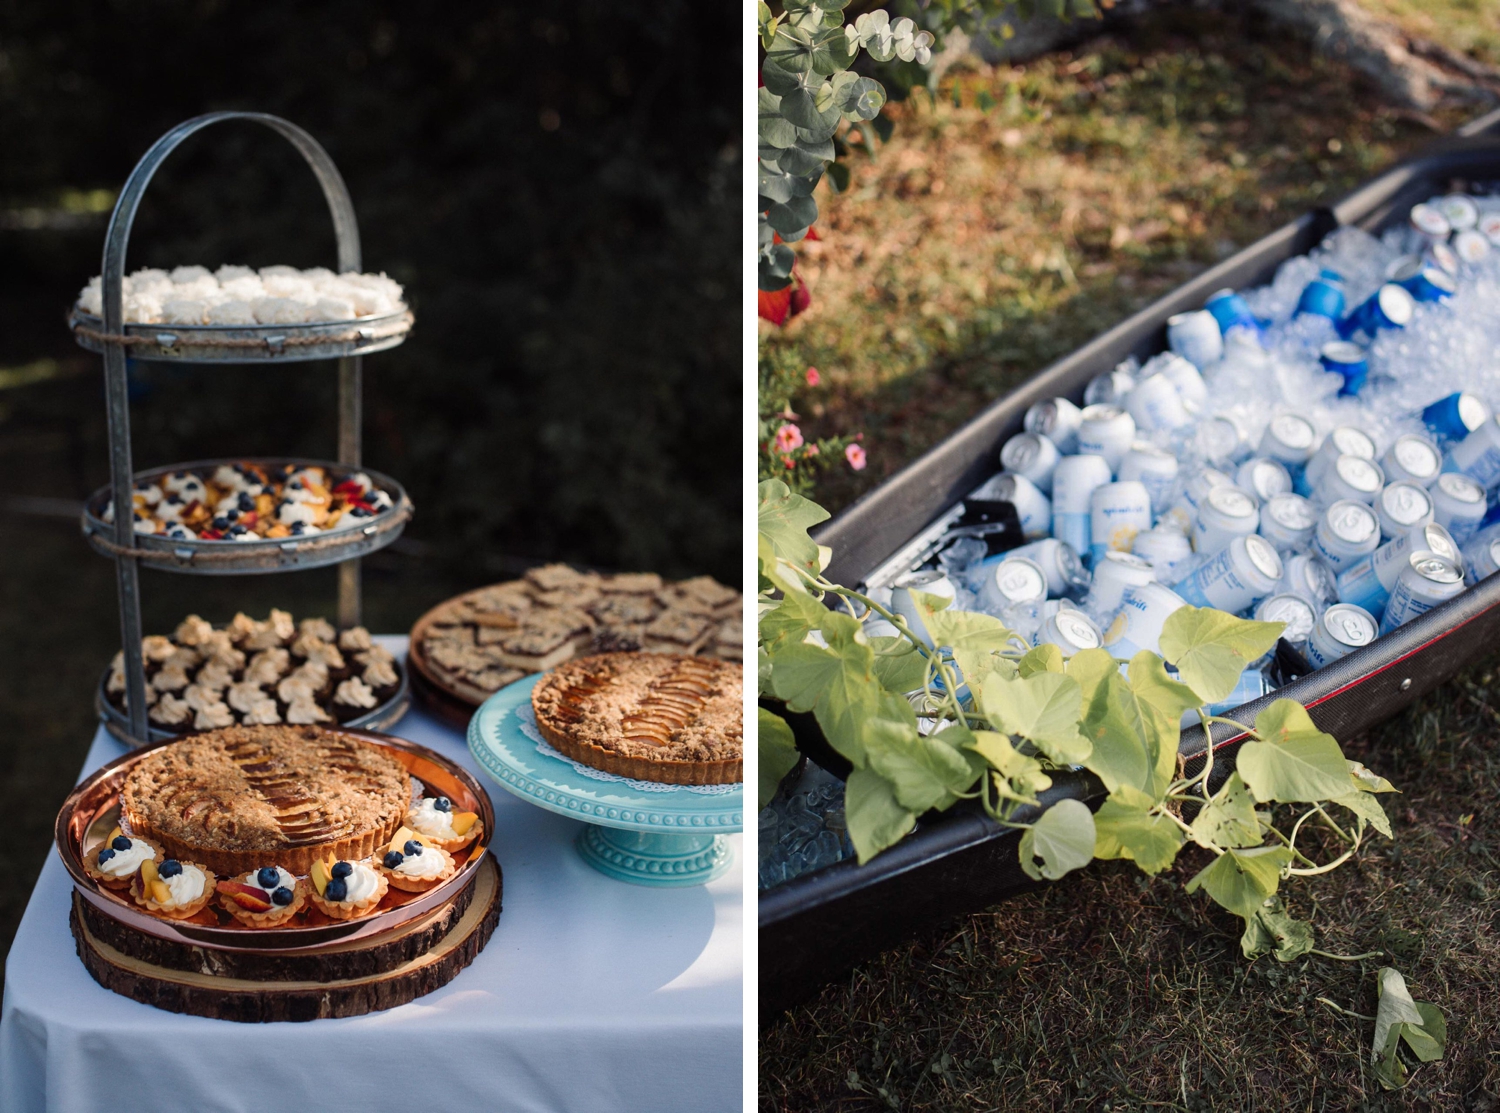 Dessert table and beer boat